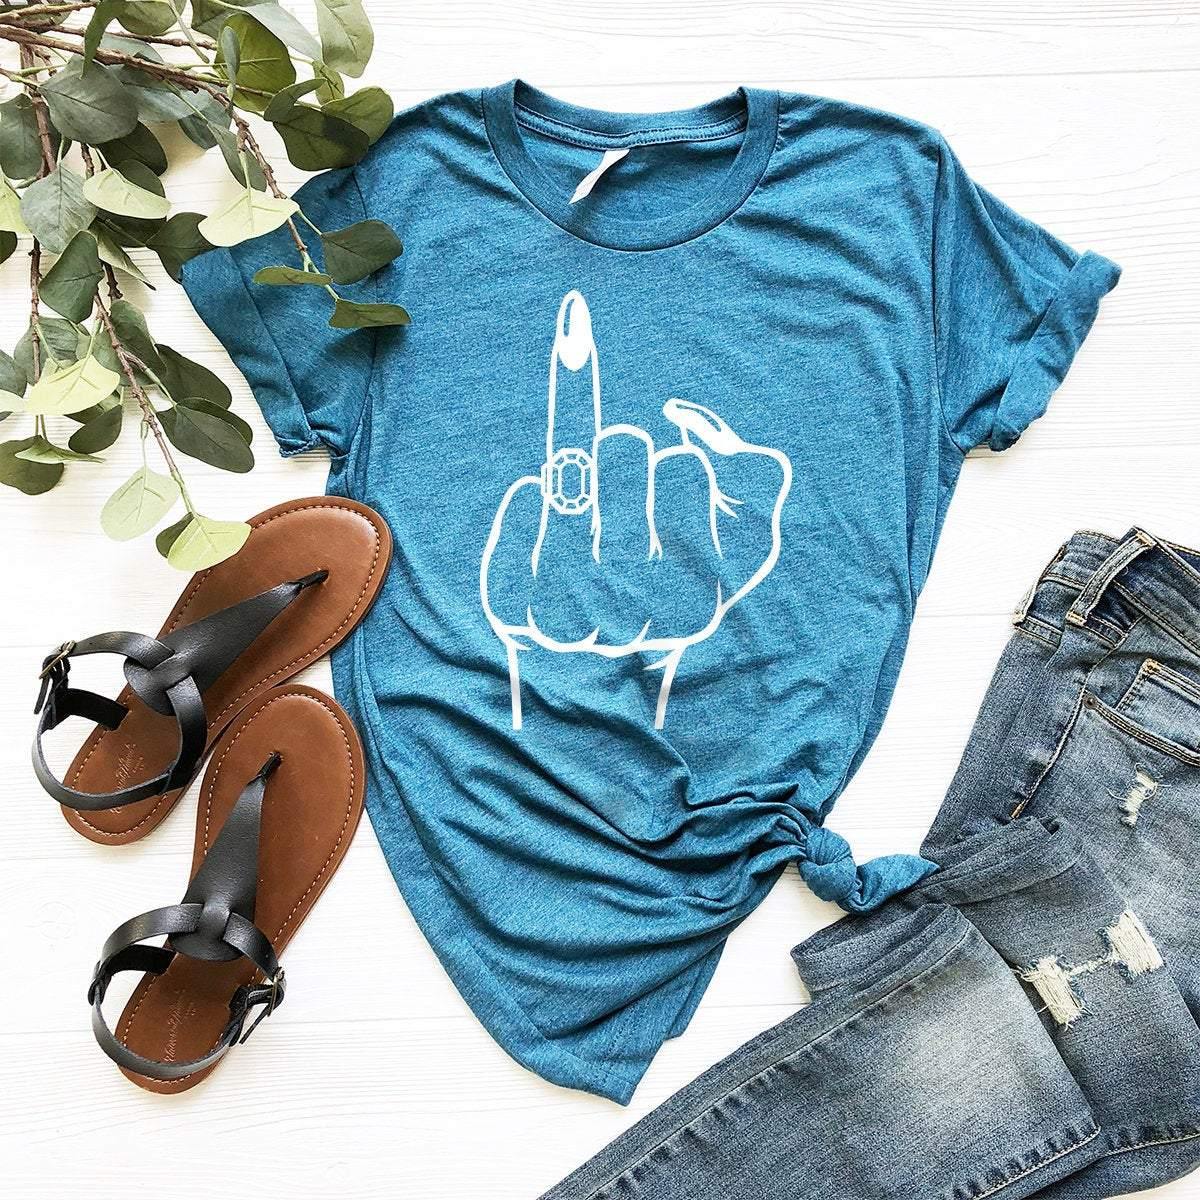 Bridal Party Shirt, Ring Finger With Ring Shirt, Funny Bridal Shirt, Engaged AF T-Shirt, Engagement Announcement, Bride Finger Shirt - Fastdeliverytees.com